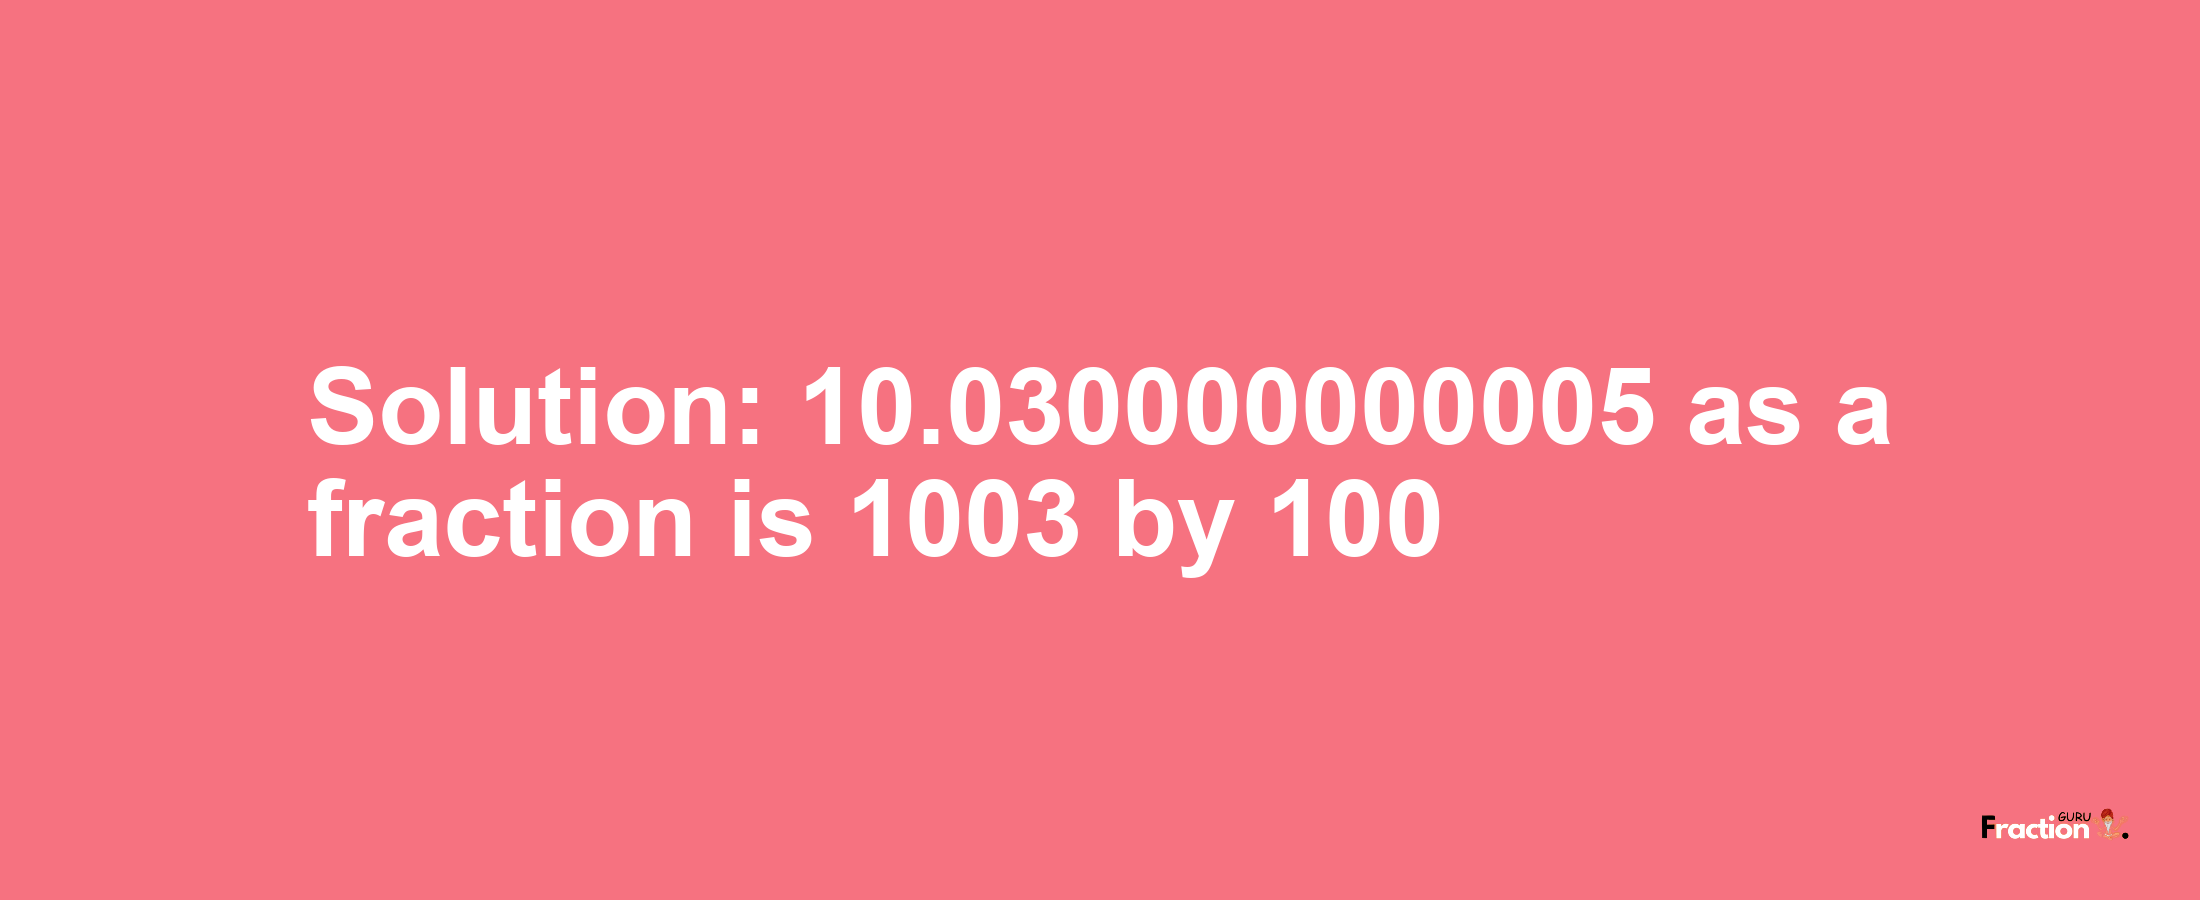 Solution:10.030000000005 as a fraction is 1003/100